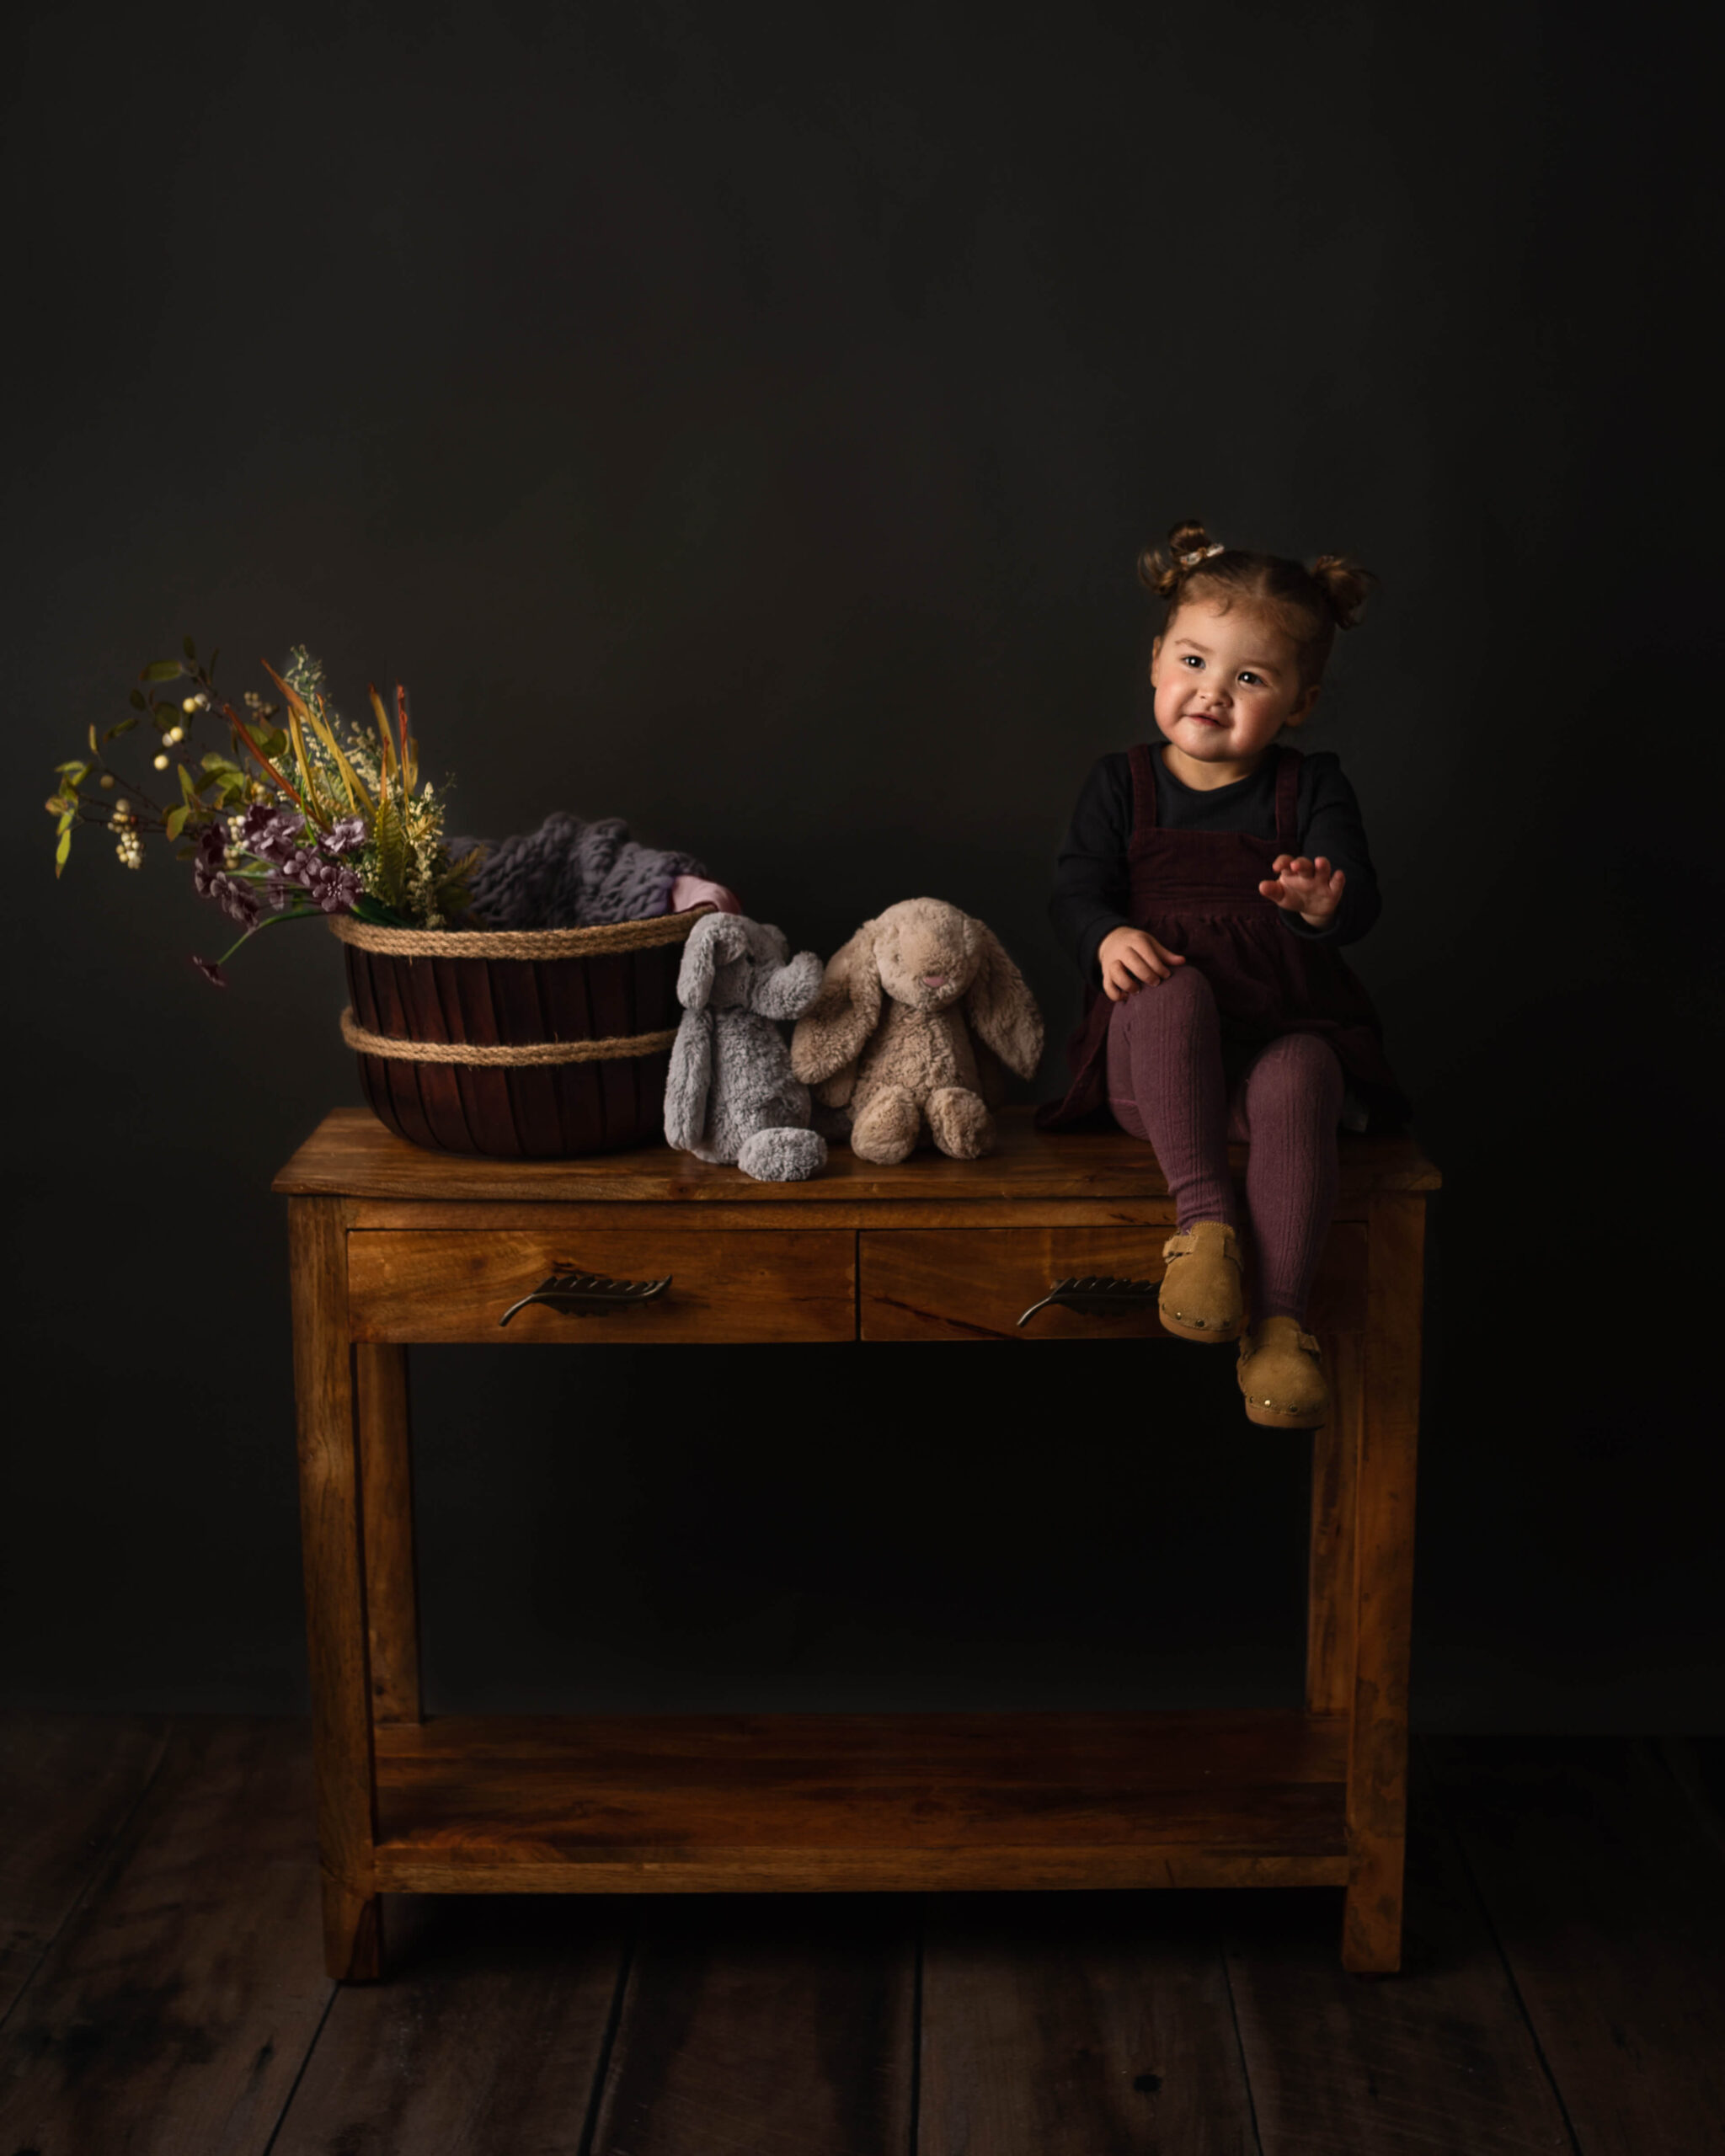 Little girl waiting for the arrival of her baby brother sitting on a wooden table with flowers in a basket with jellycat teddys - Little Blue Boutique Calabasas